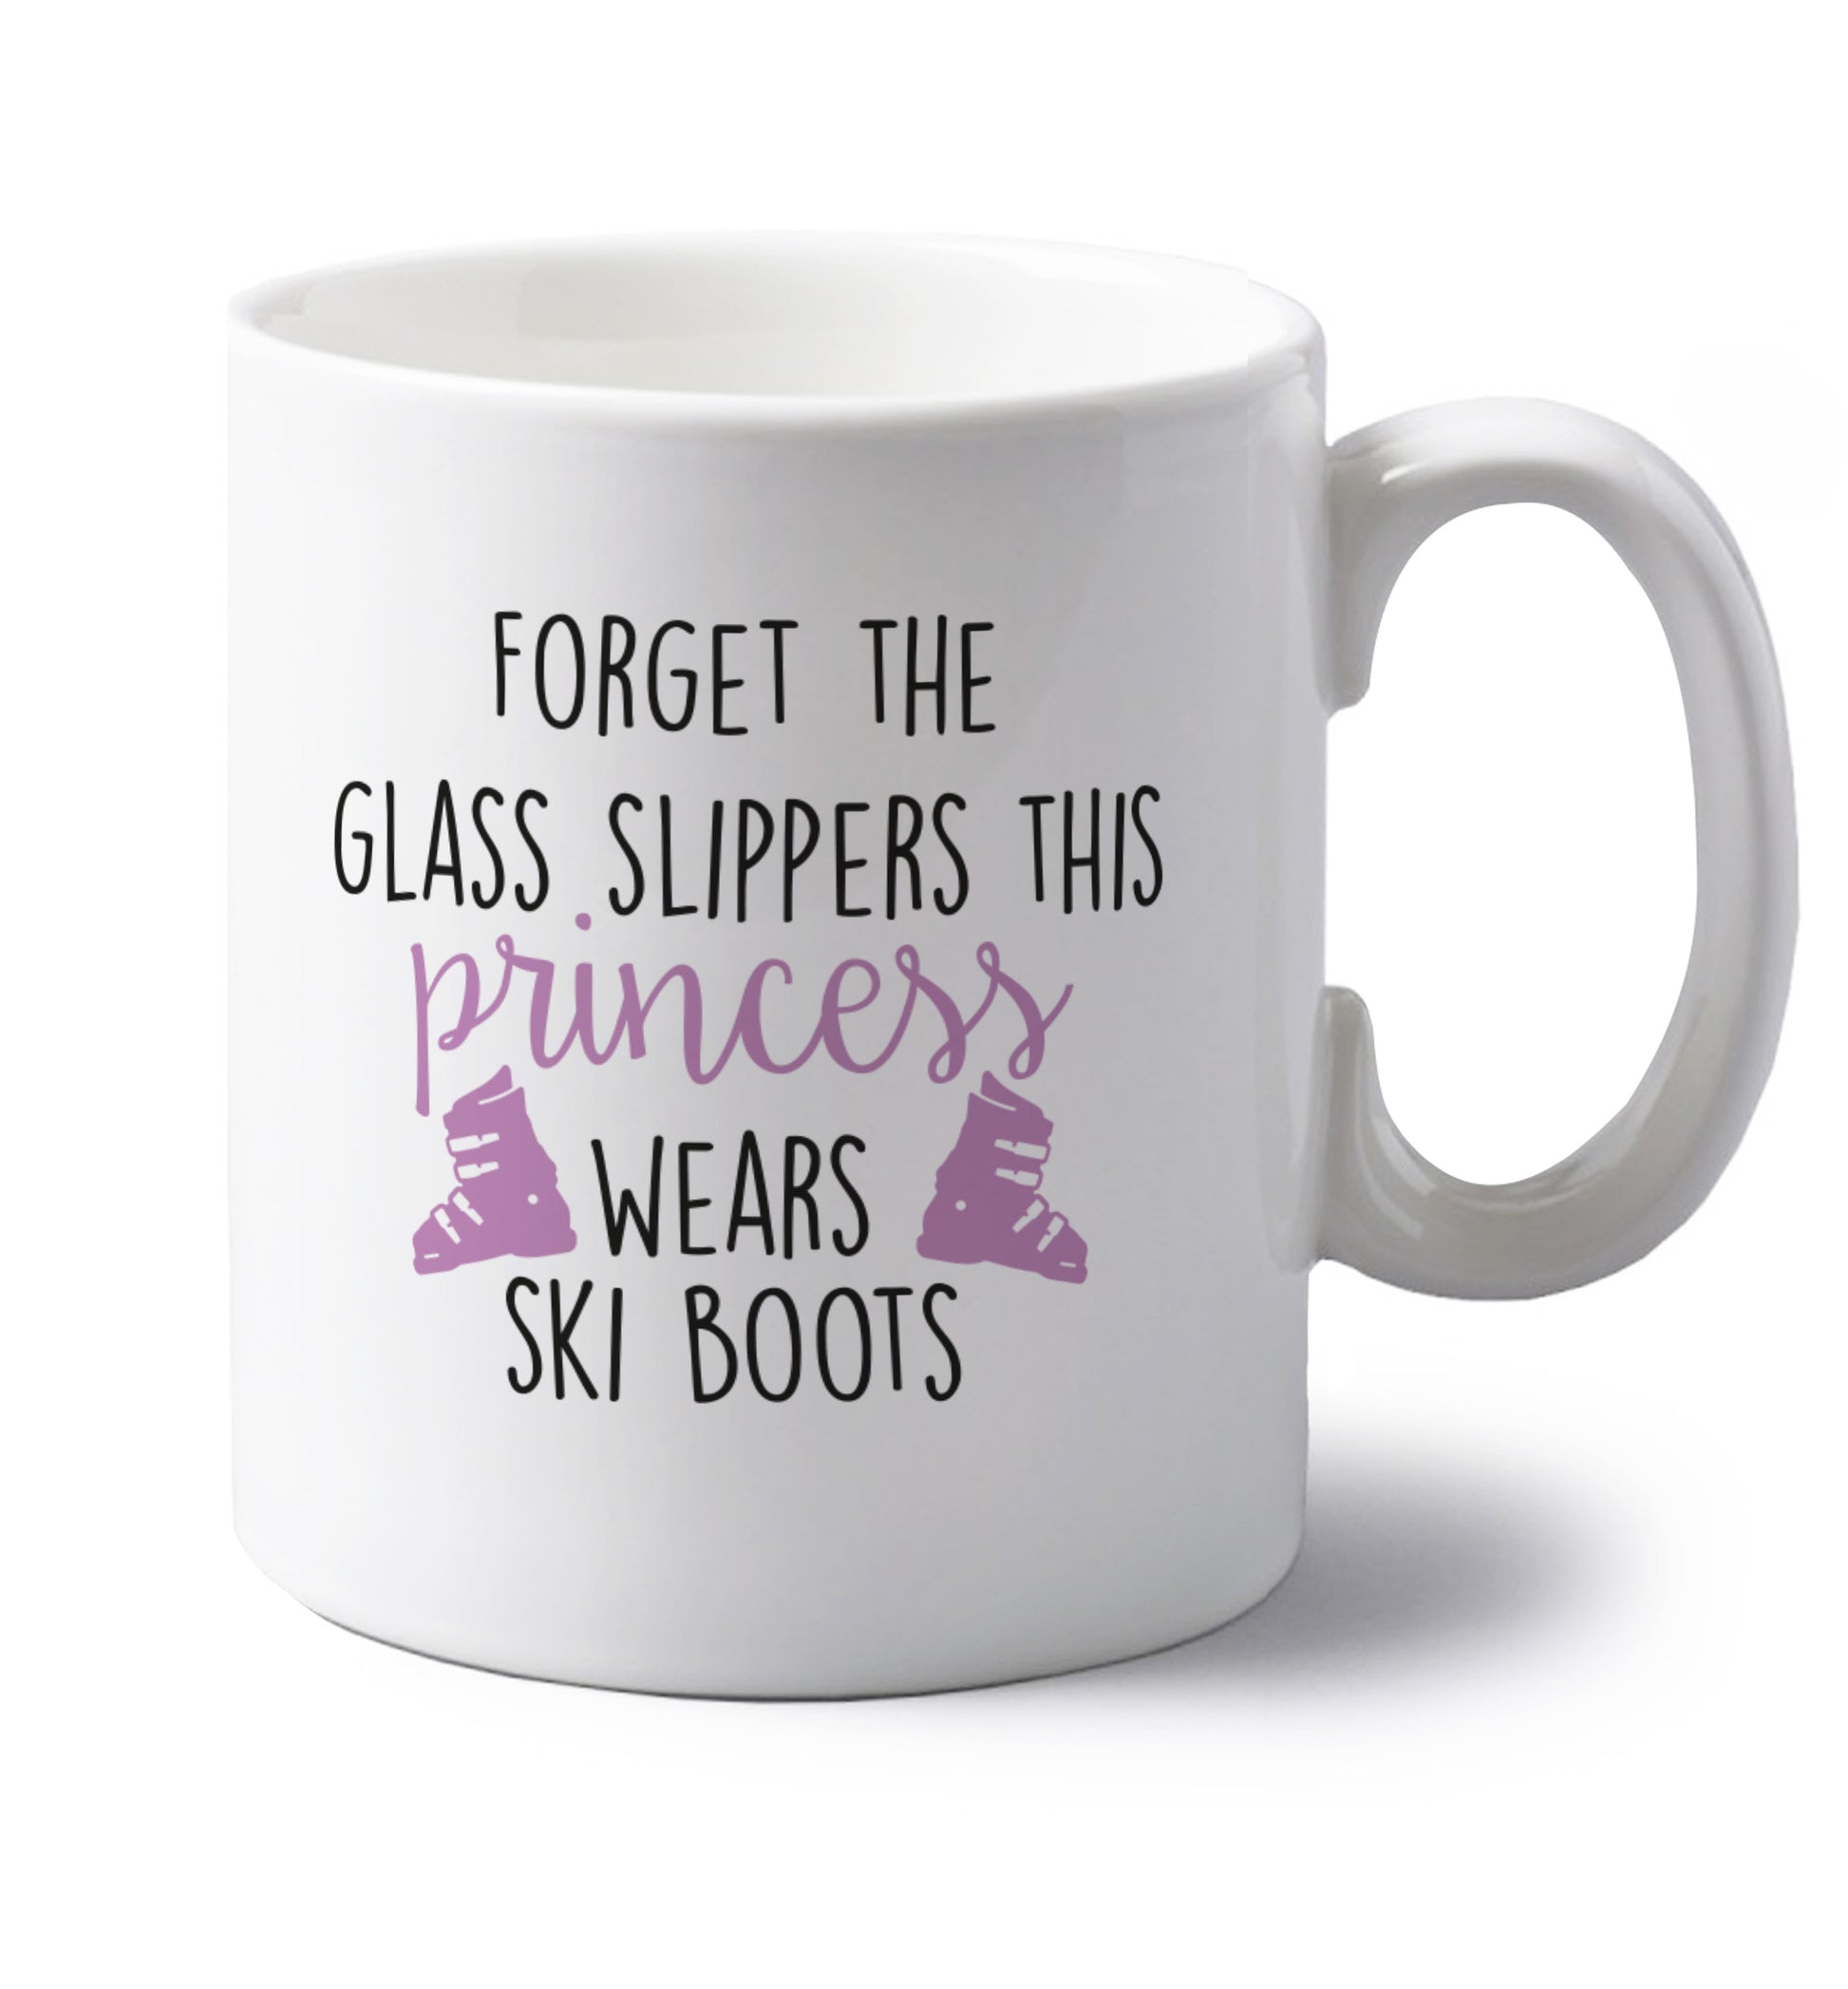 Forget the glass slippers this princess wears ski boots left handed white ceramic mug 